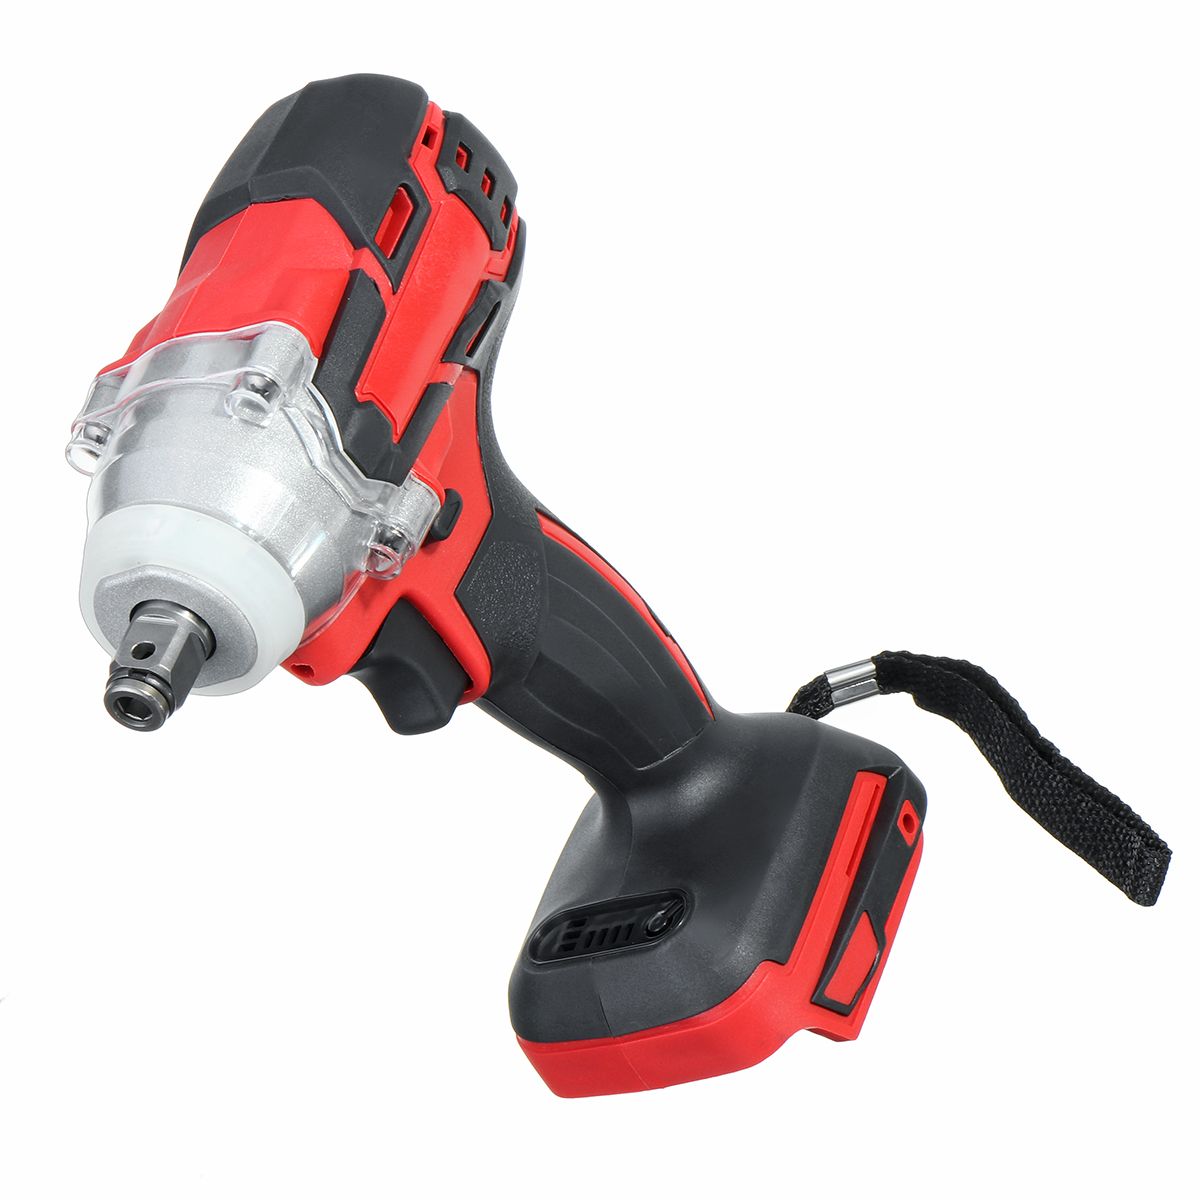 18V-520Nm-Cordless-Impact-Drill-Brushless-Li-ion-Electric-Drill-Tool-For-Makita-Battery-Stepless-Spe-1612126